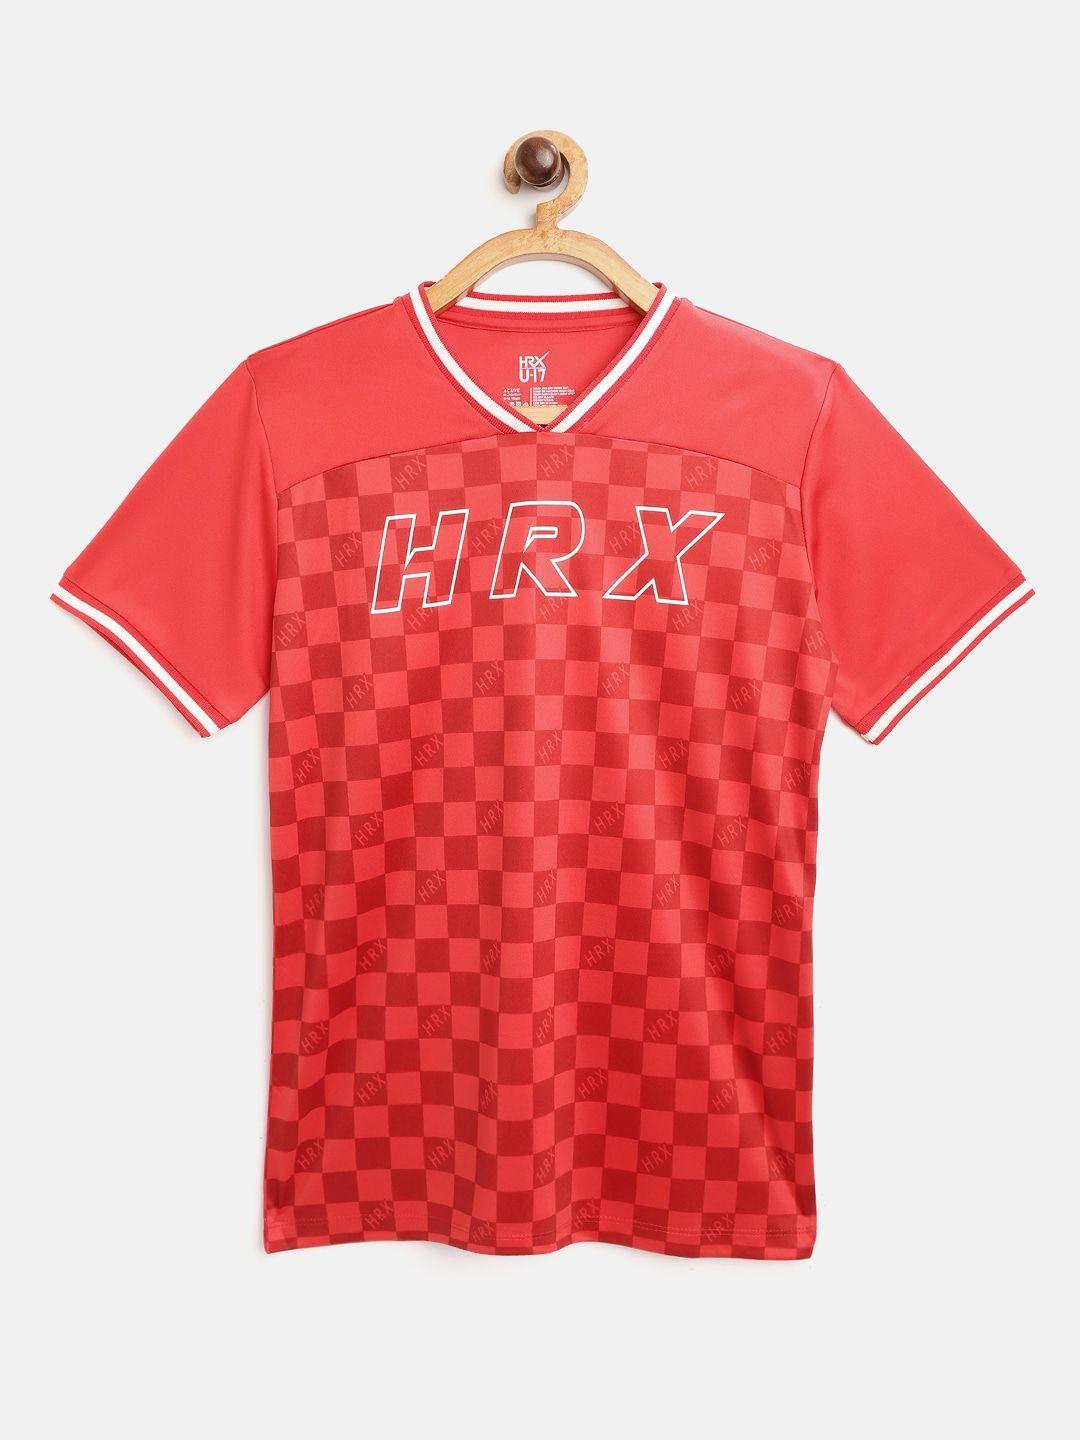 hrx by hrithik roshan u-17 boys high risk red solid lycra rapid-dry antimicrobial active tshirt